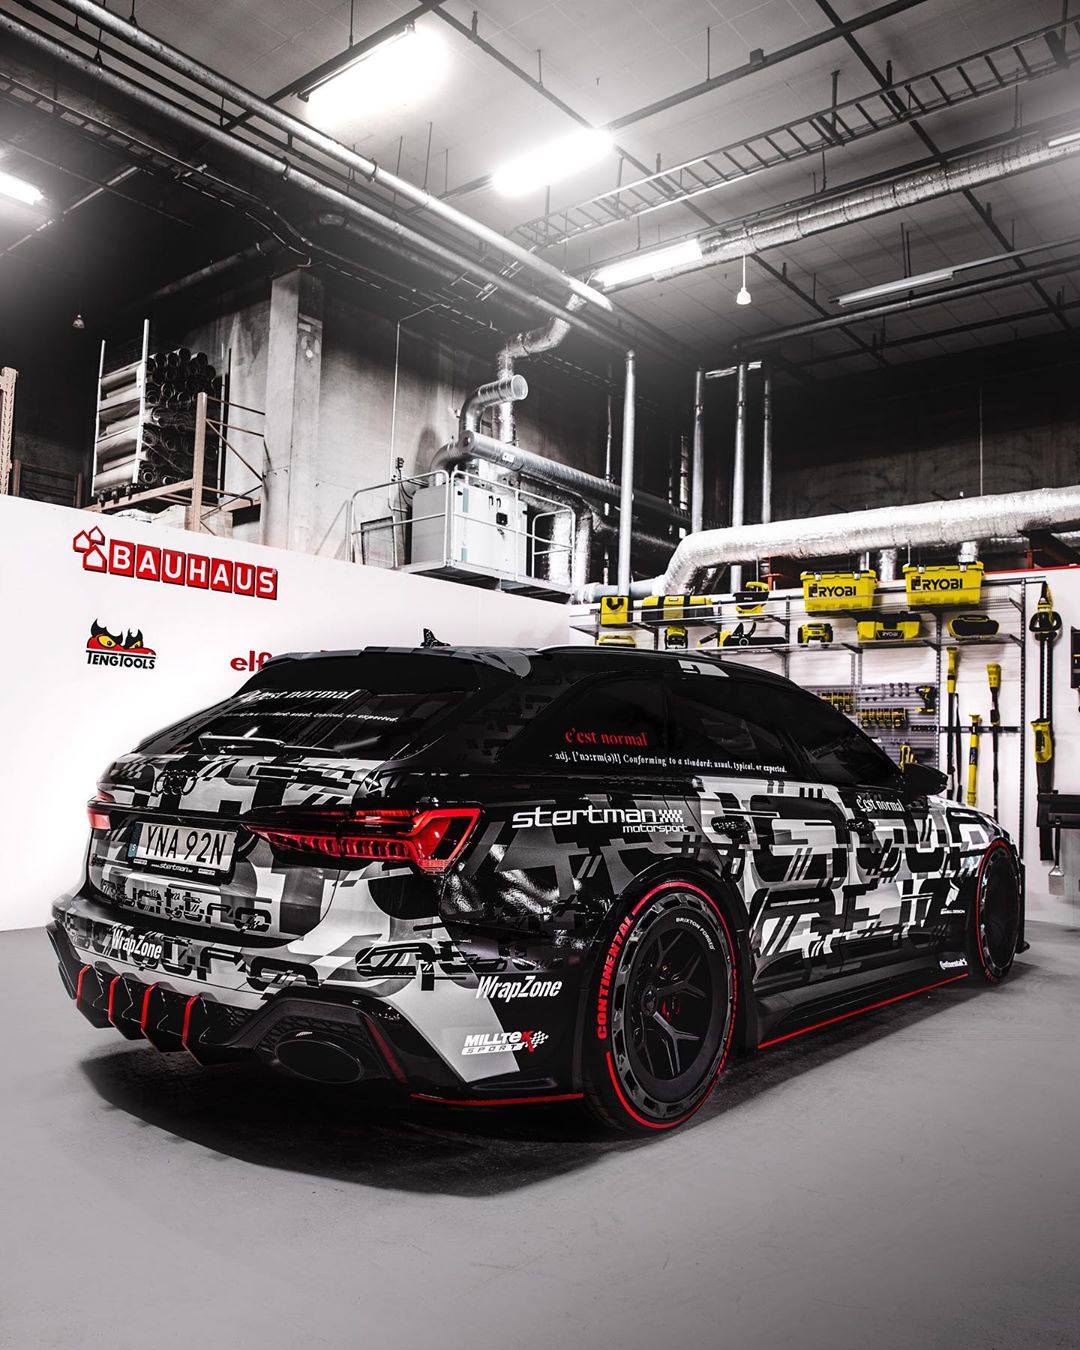 jon-olsson-s-1000-hp-2020-audi-rs6-is-the-meanest-in-the-game_3.jpg